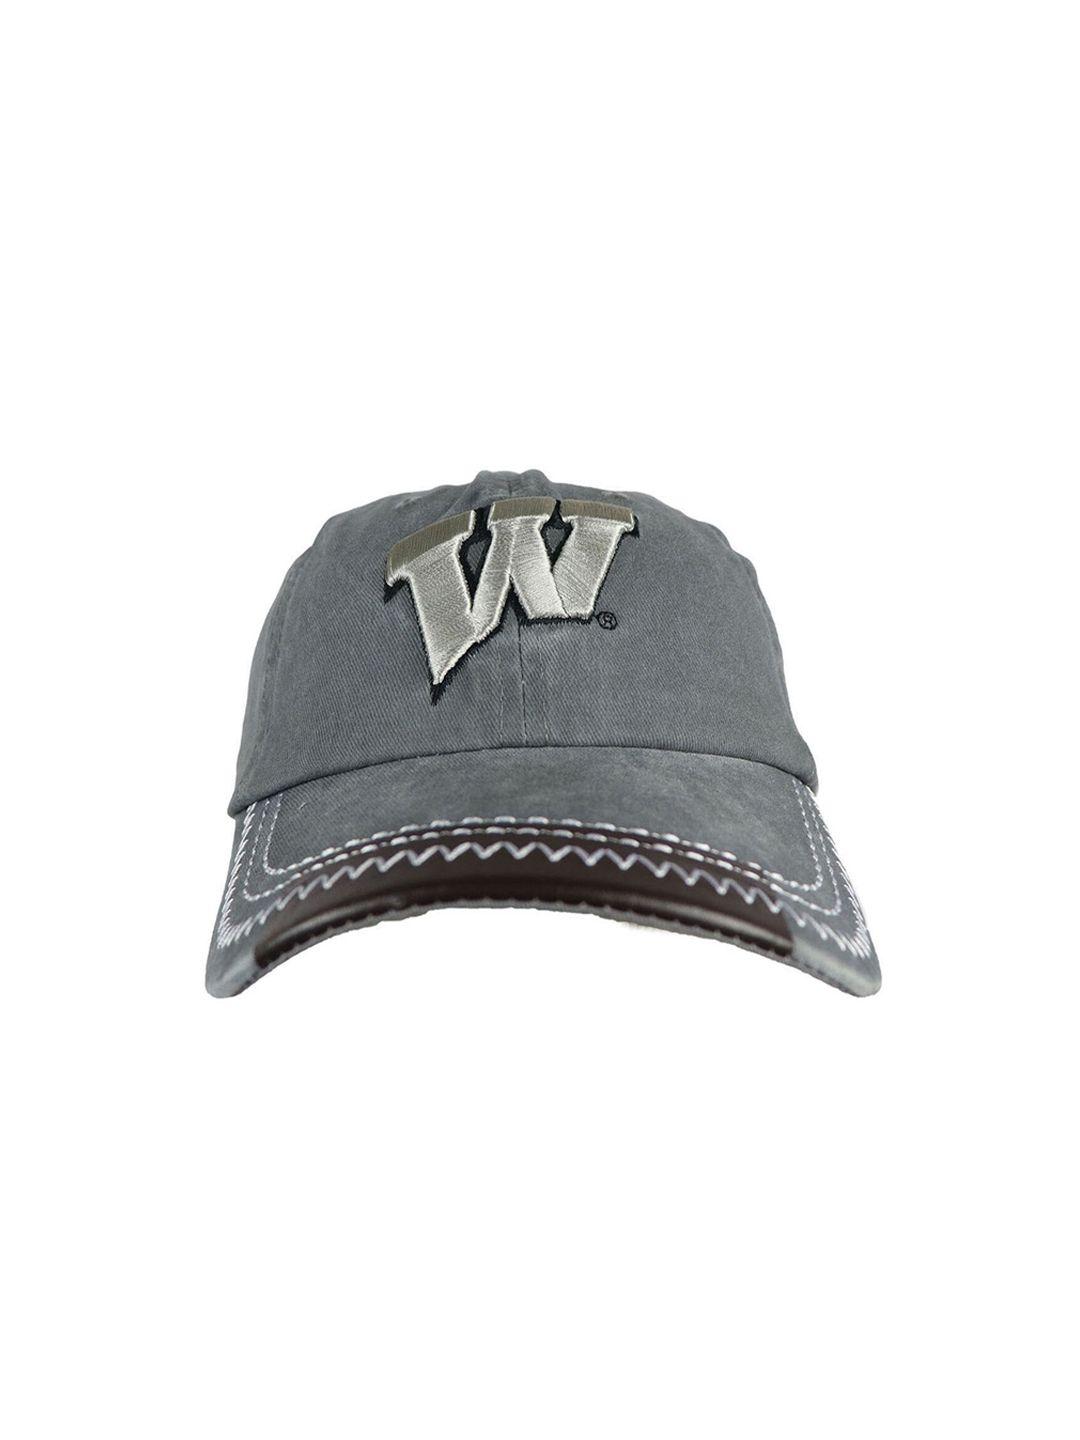 isweven unisex grey embroidered snapback cap